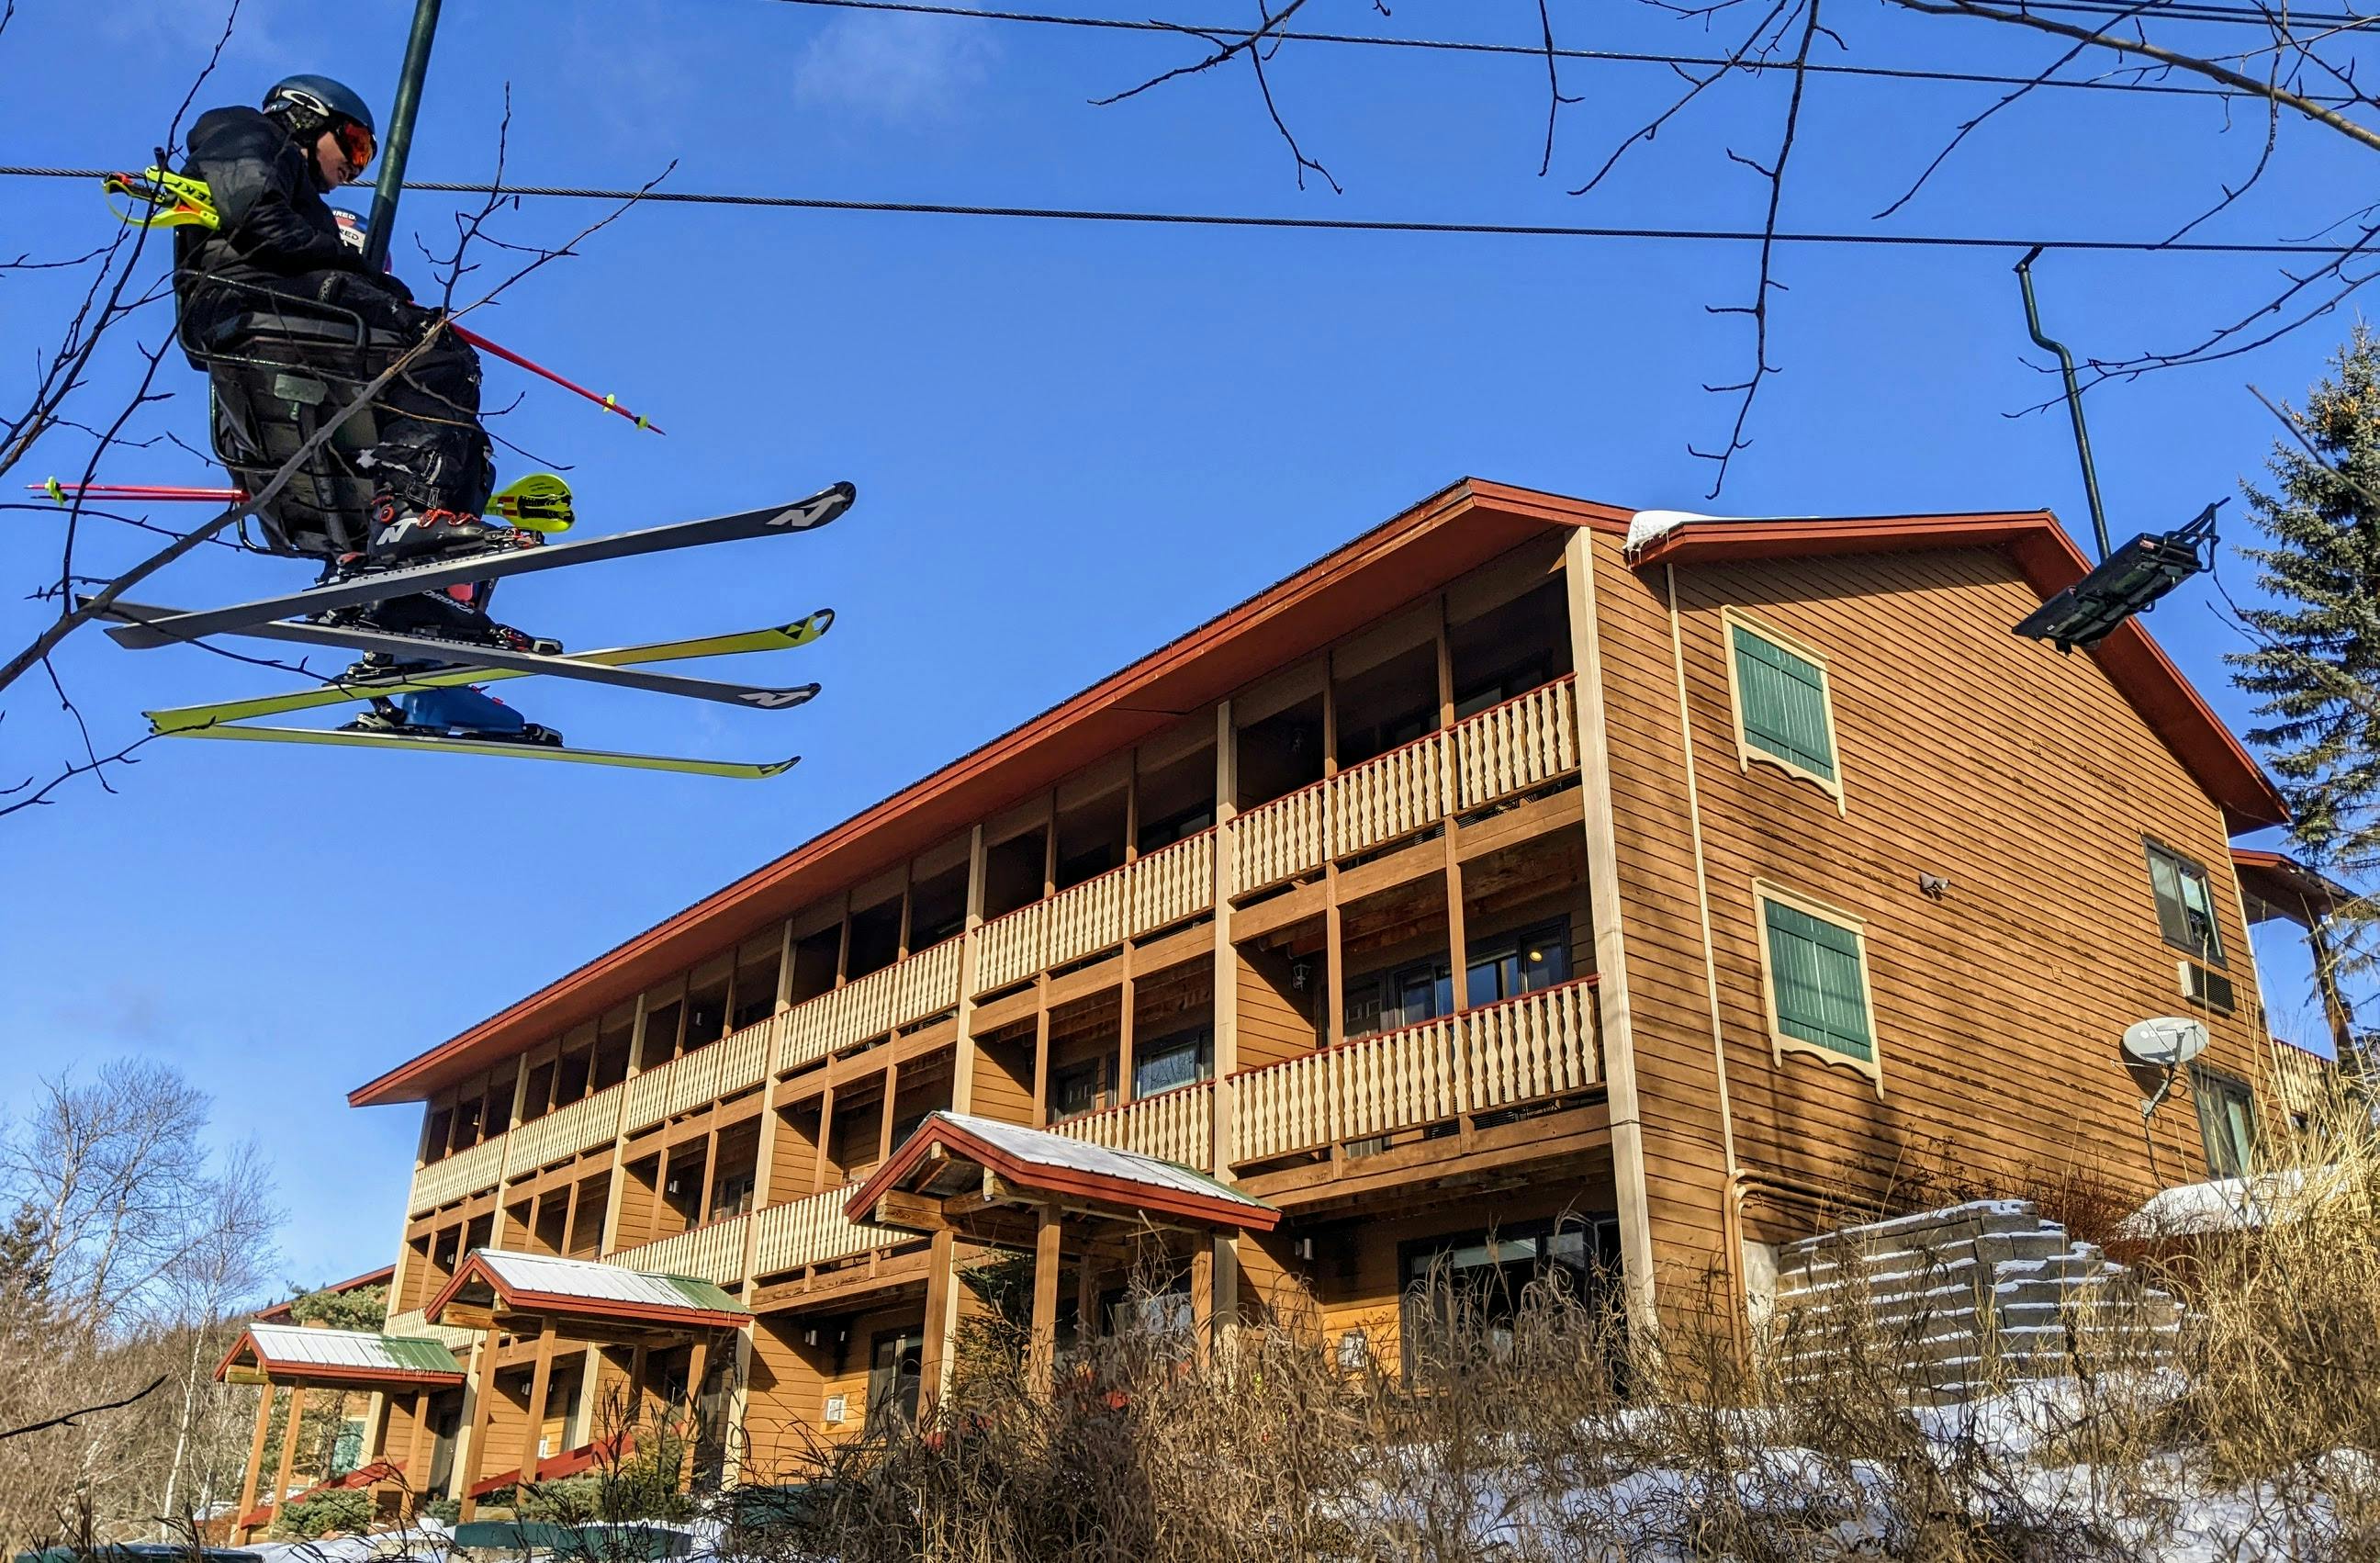 Skiers ride the chairlift past one of the buildings of Eagle Ridge Resort at Lutsen.